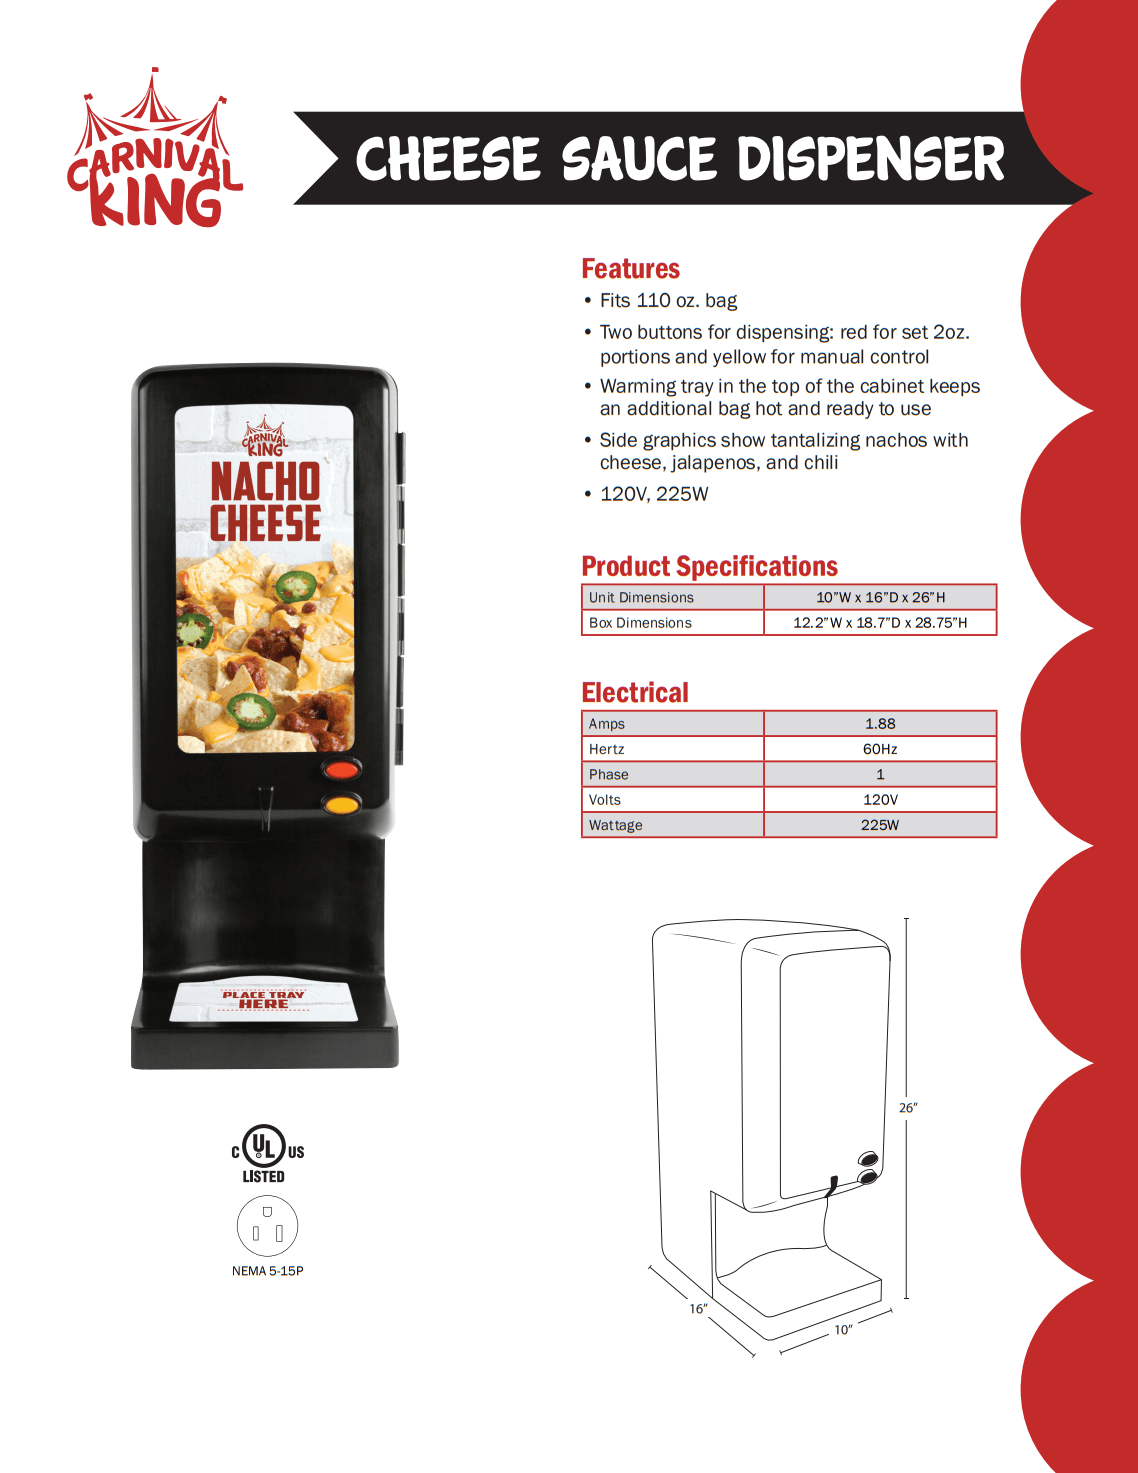 Carnival King CD225 Peristaltic Cheese Sauce Dispenser - 120V, 225W